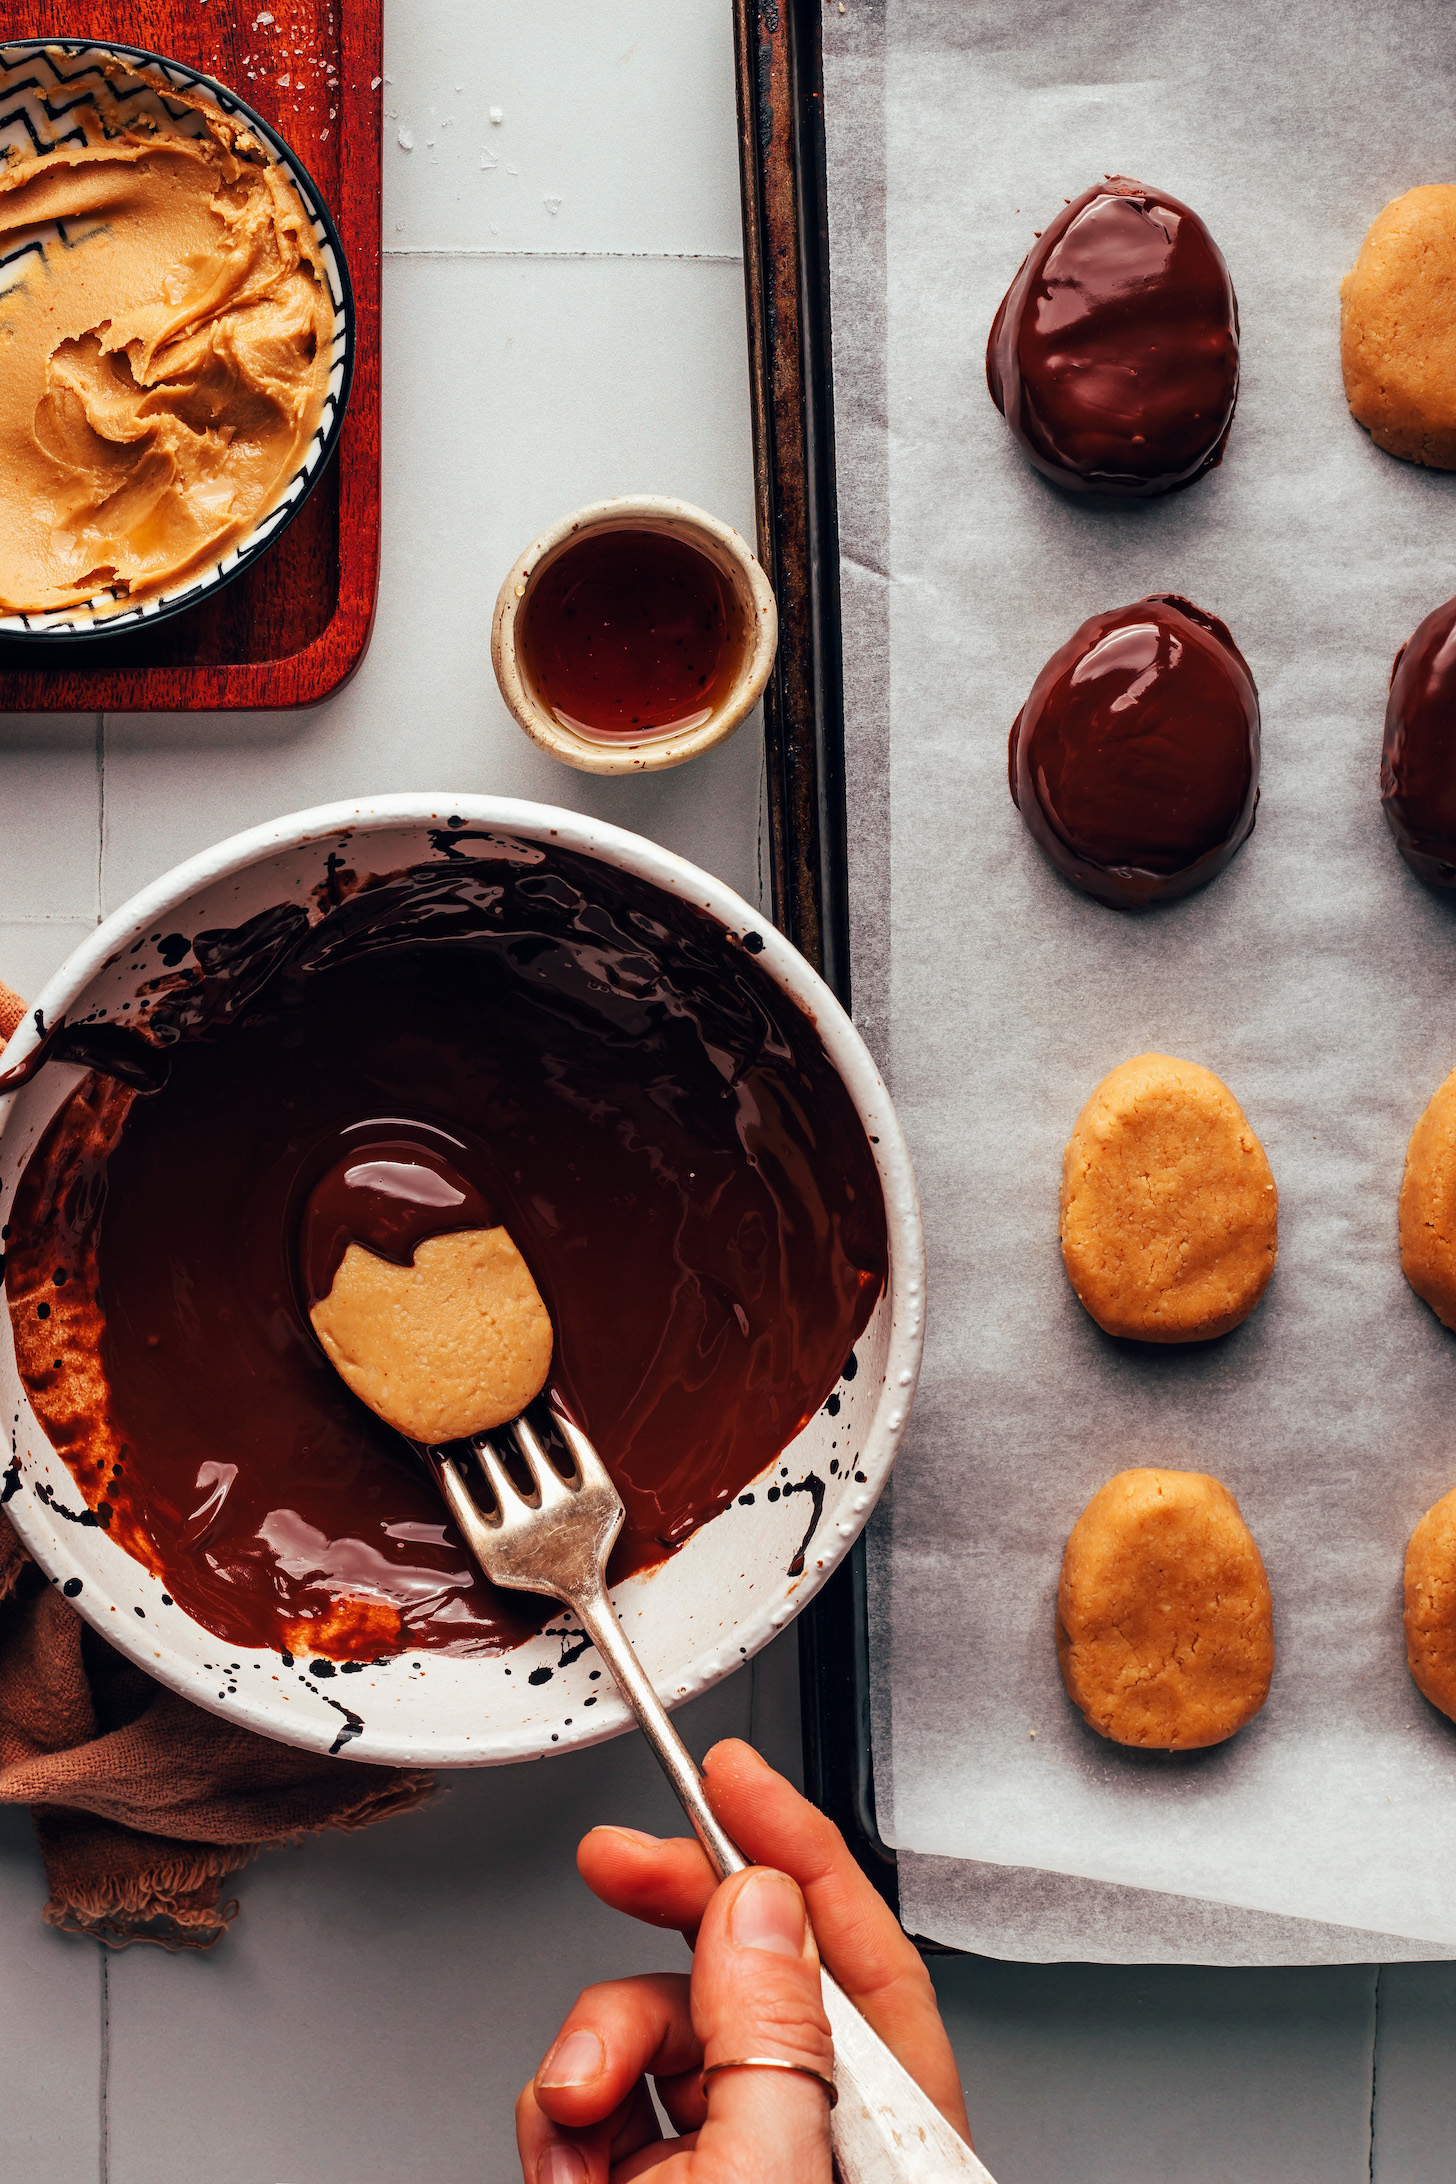 Dipping an oval-shaped peanut butter  mixture into a bowl of melted chocolate